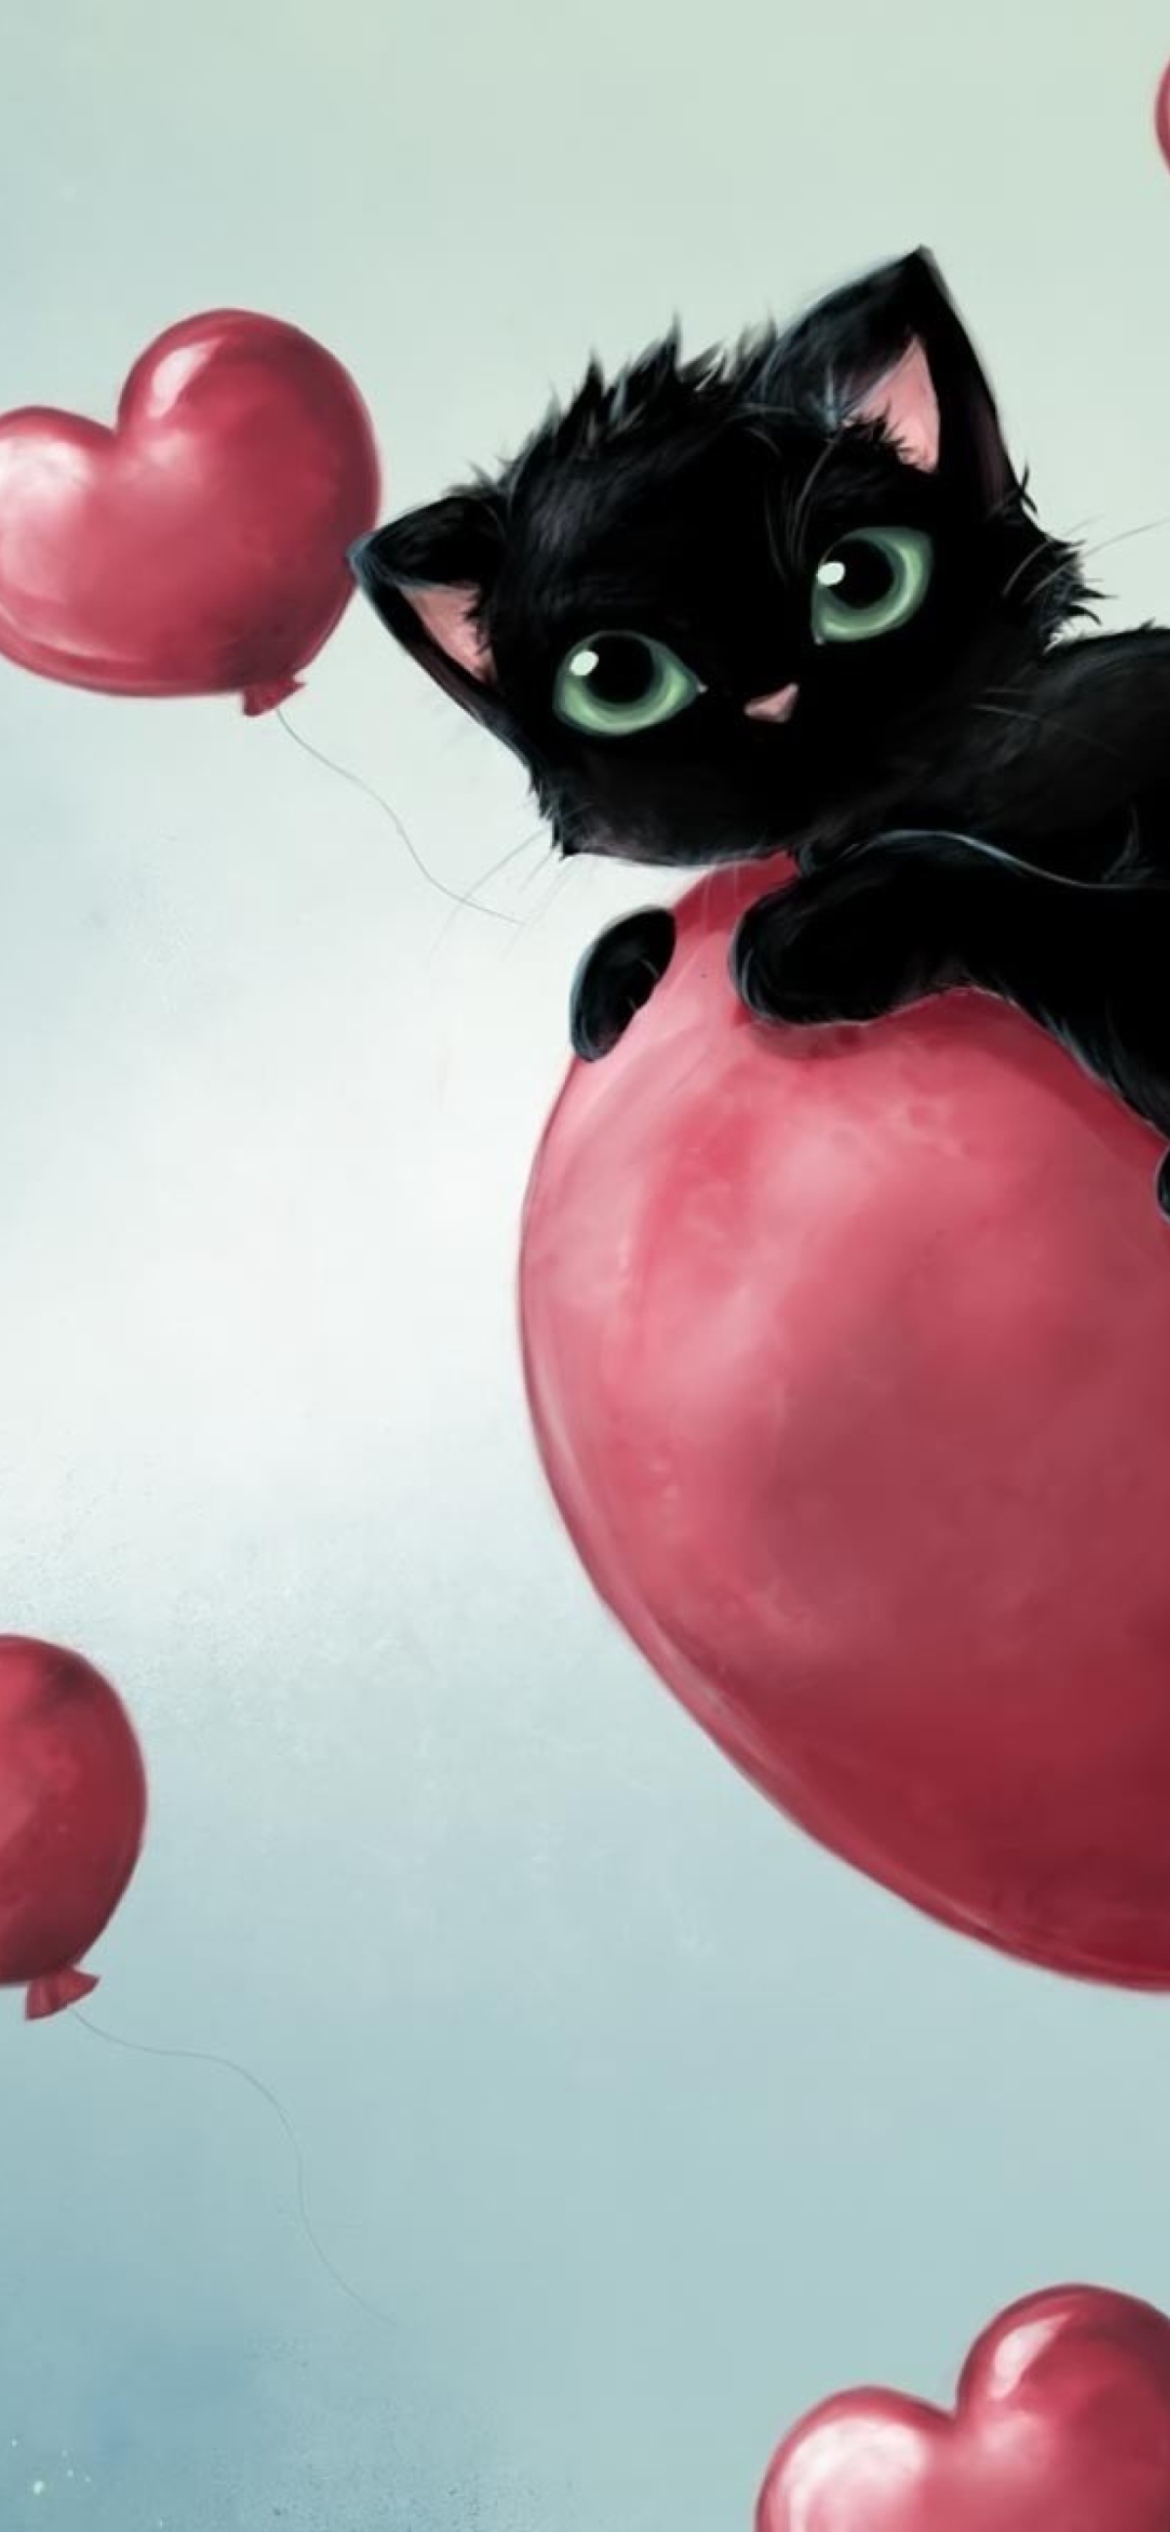 Das Black Kitty And Red Heart Balloons Wallpaper 1170x2532